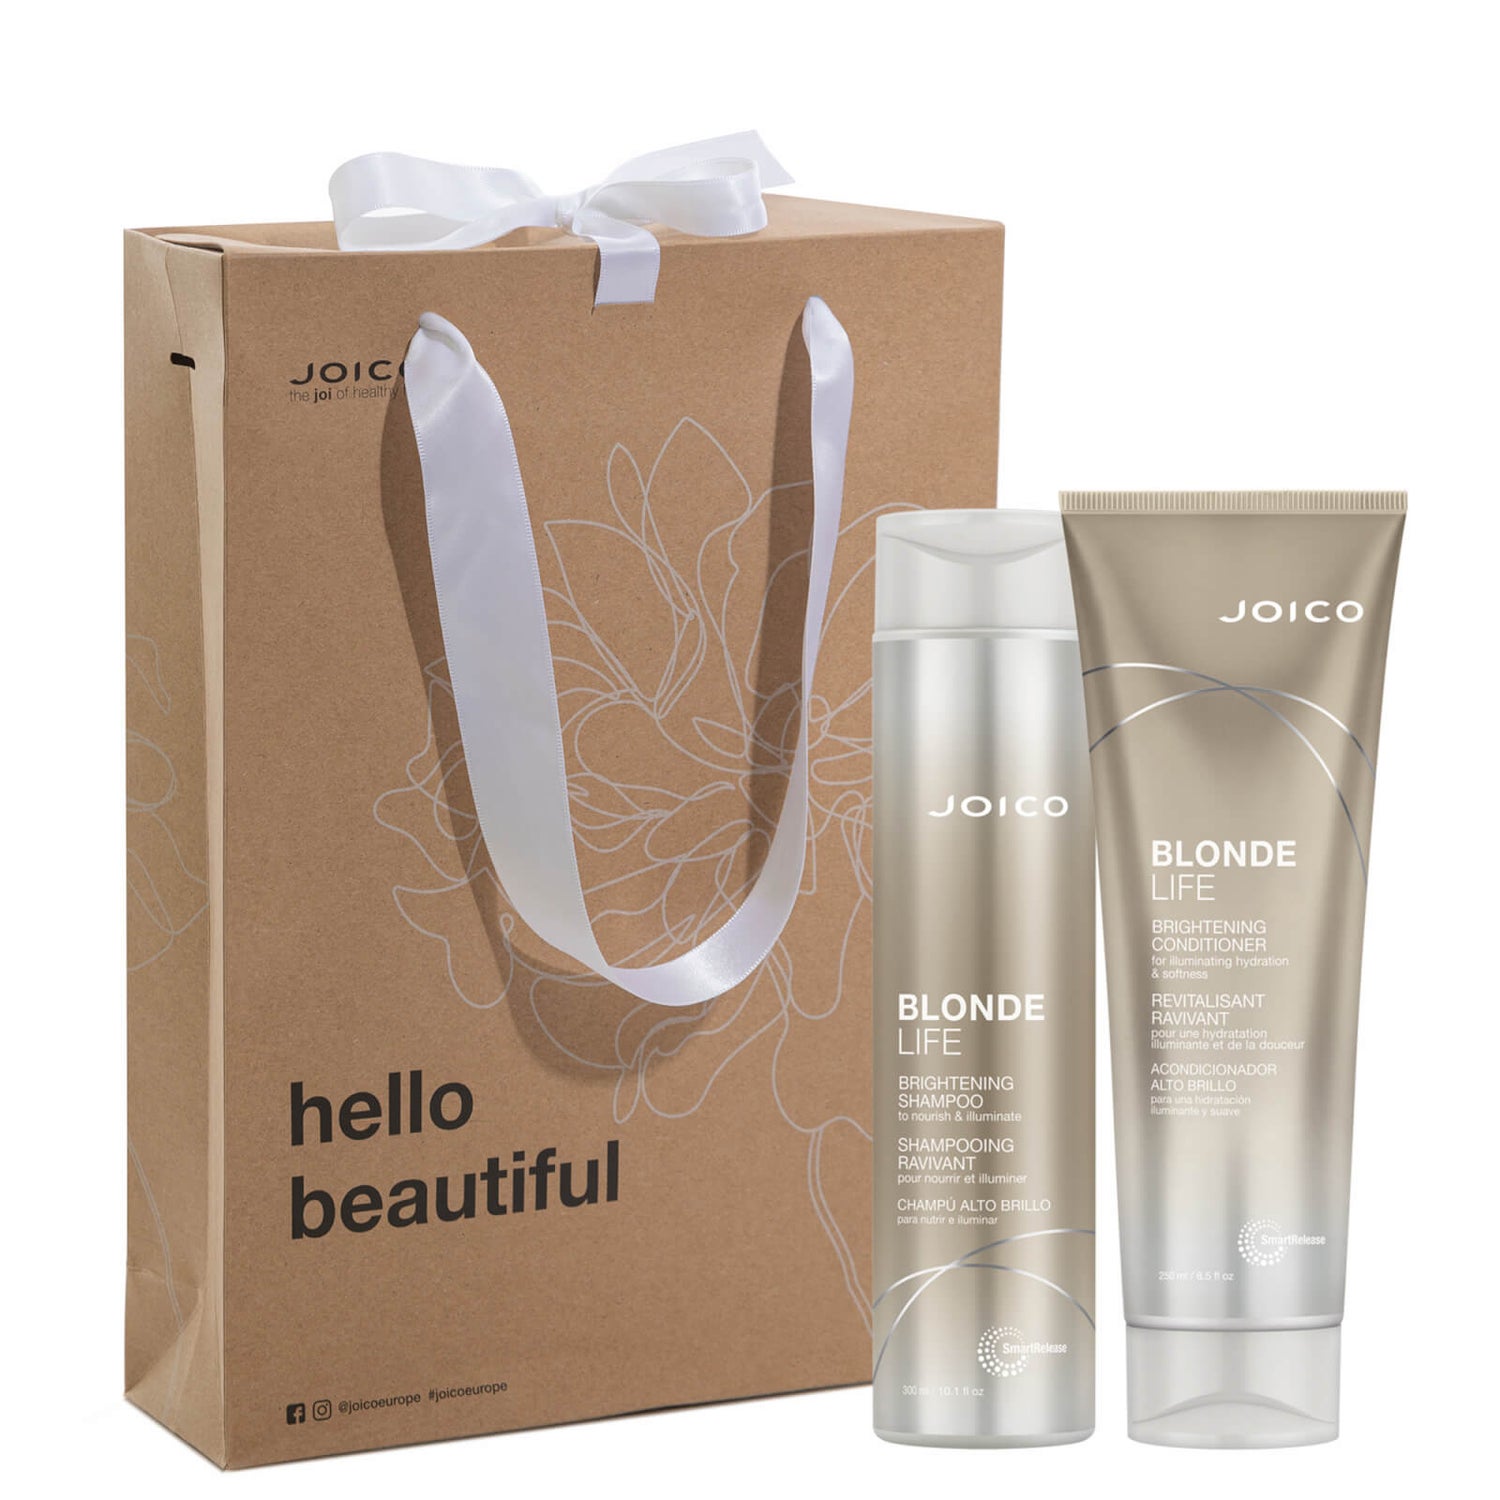 Joico Sparkles and Joi Blonde Life Shampoo and Conditioner Set (Worth £41.90)